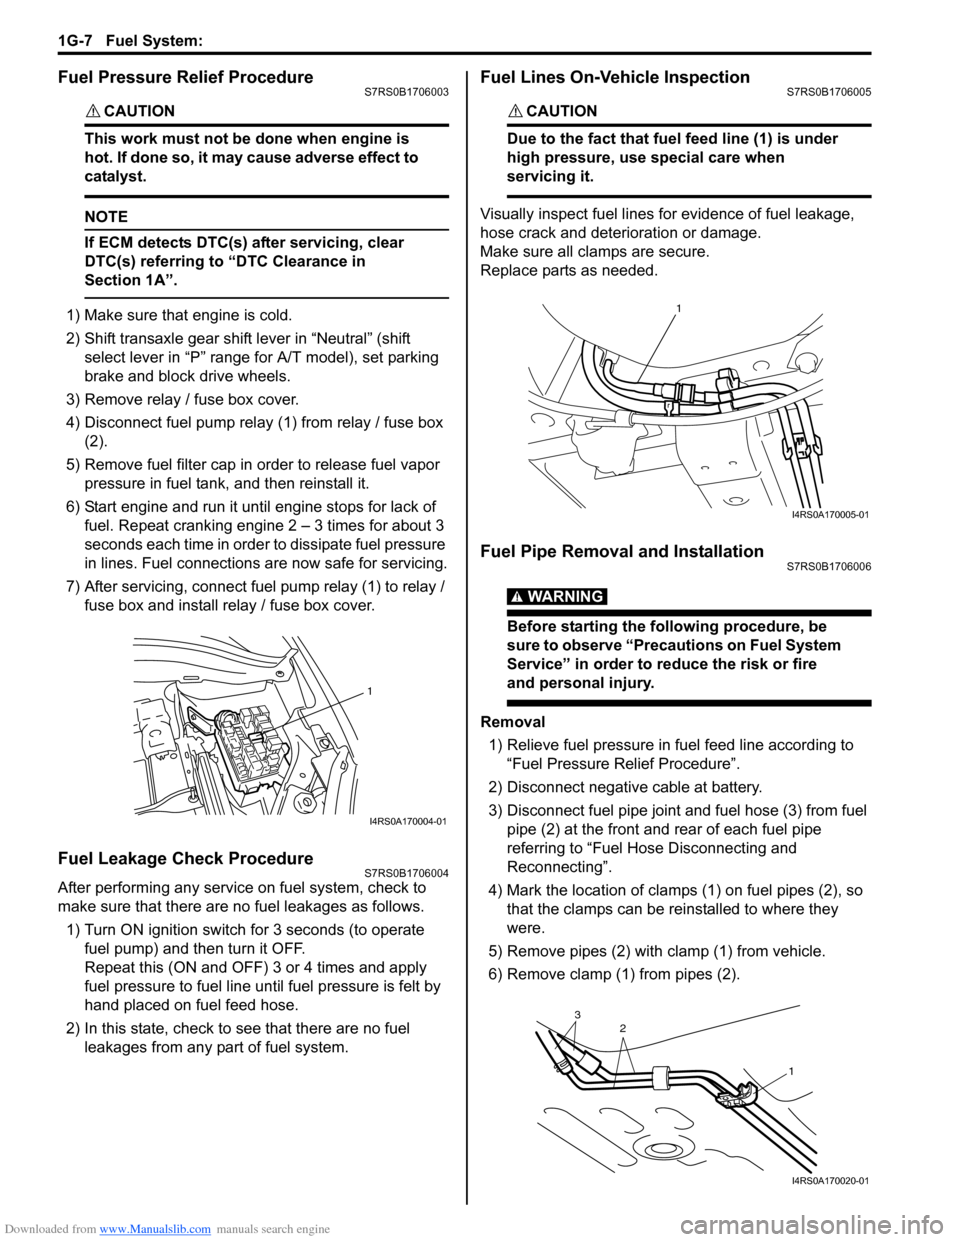 SUZUKI SWIFT 2006 2.G Service Workshop Manual Downloaded from www.Manualslib.com manuals search engine 1G-7 Fuel System: 
Fuel Pressure Relief ProcedureS7RS0B1706003
CAUTION! 
This work must not be done when engine is 
hot. If done so, it may cau